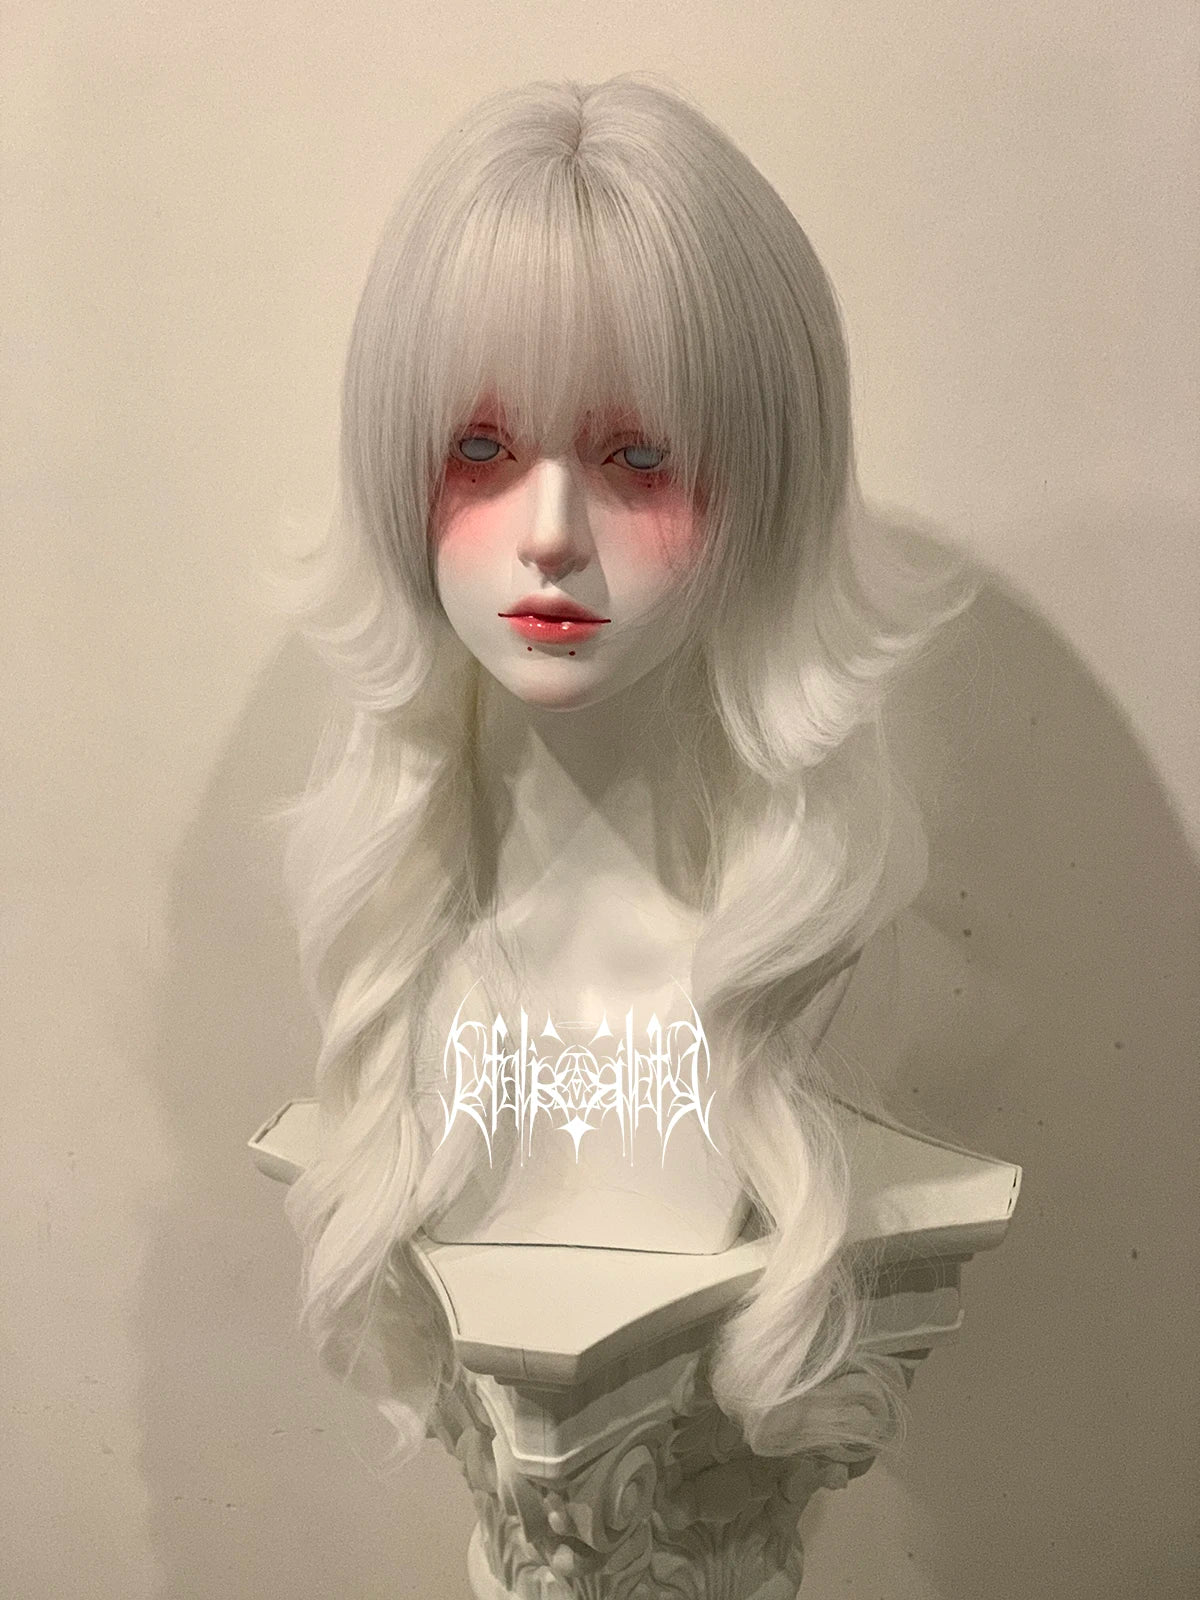 Light Gray Gradient Color Lolita Gothic Style Punk Wear White Wig Female Long Curly Hair